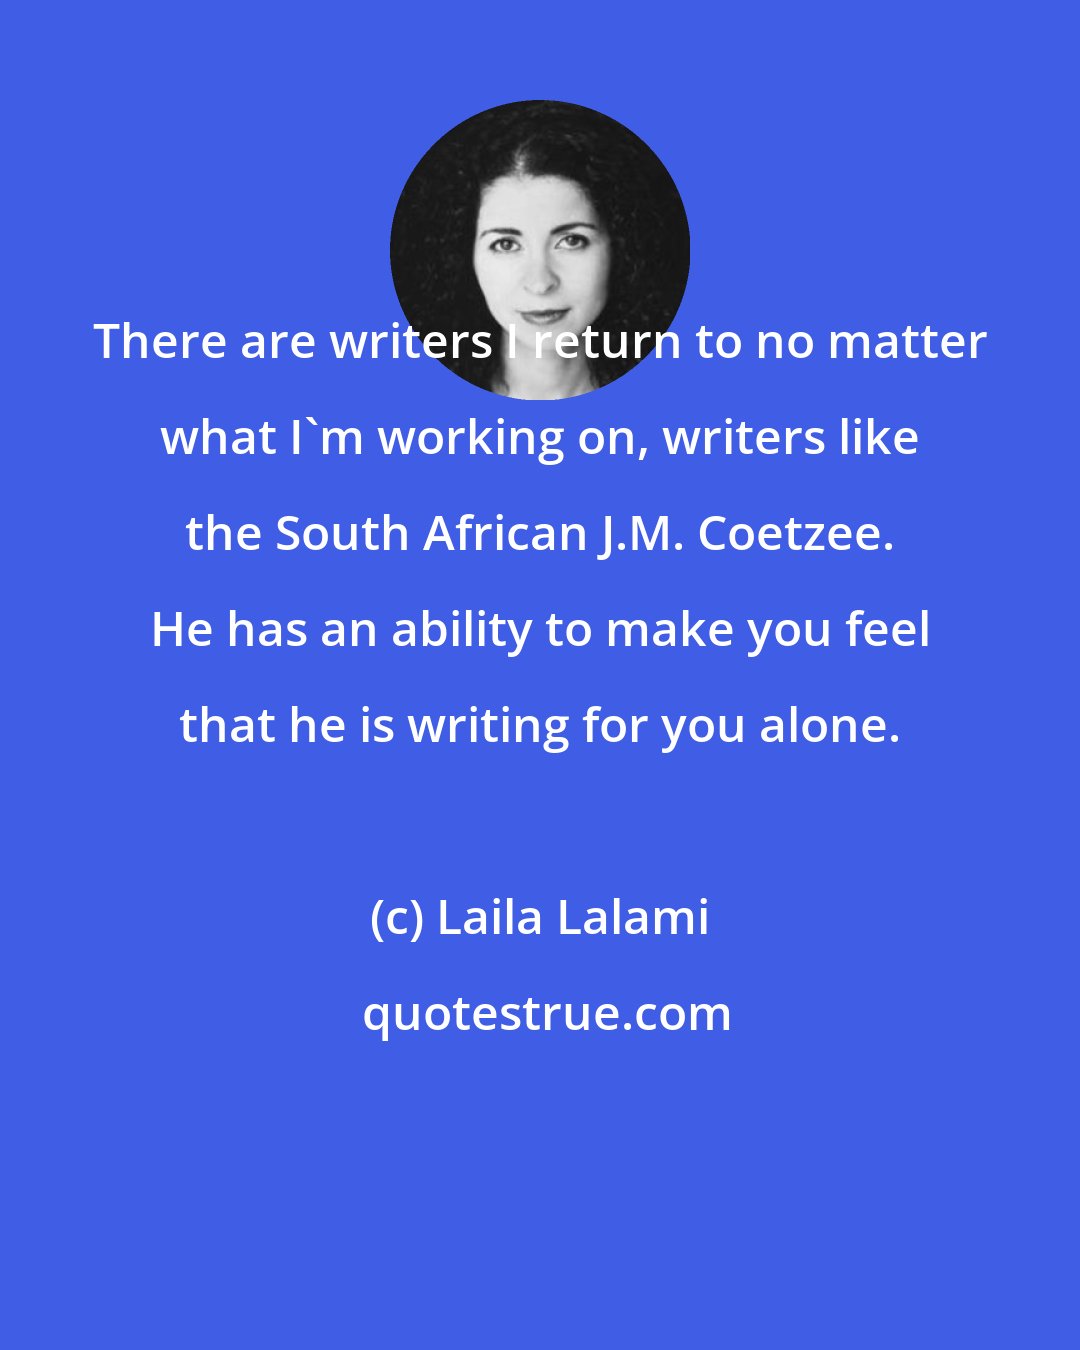 Laila Lalami: There are writers I return to no matter what I'm working on, writers like the South African J.M. Coetzee. He has an ability to make you feel that he is writing for you alone.